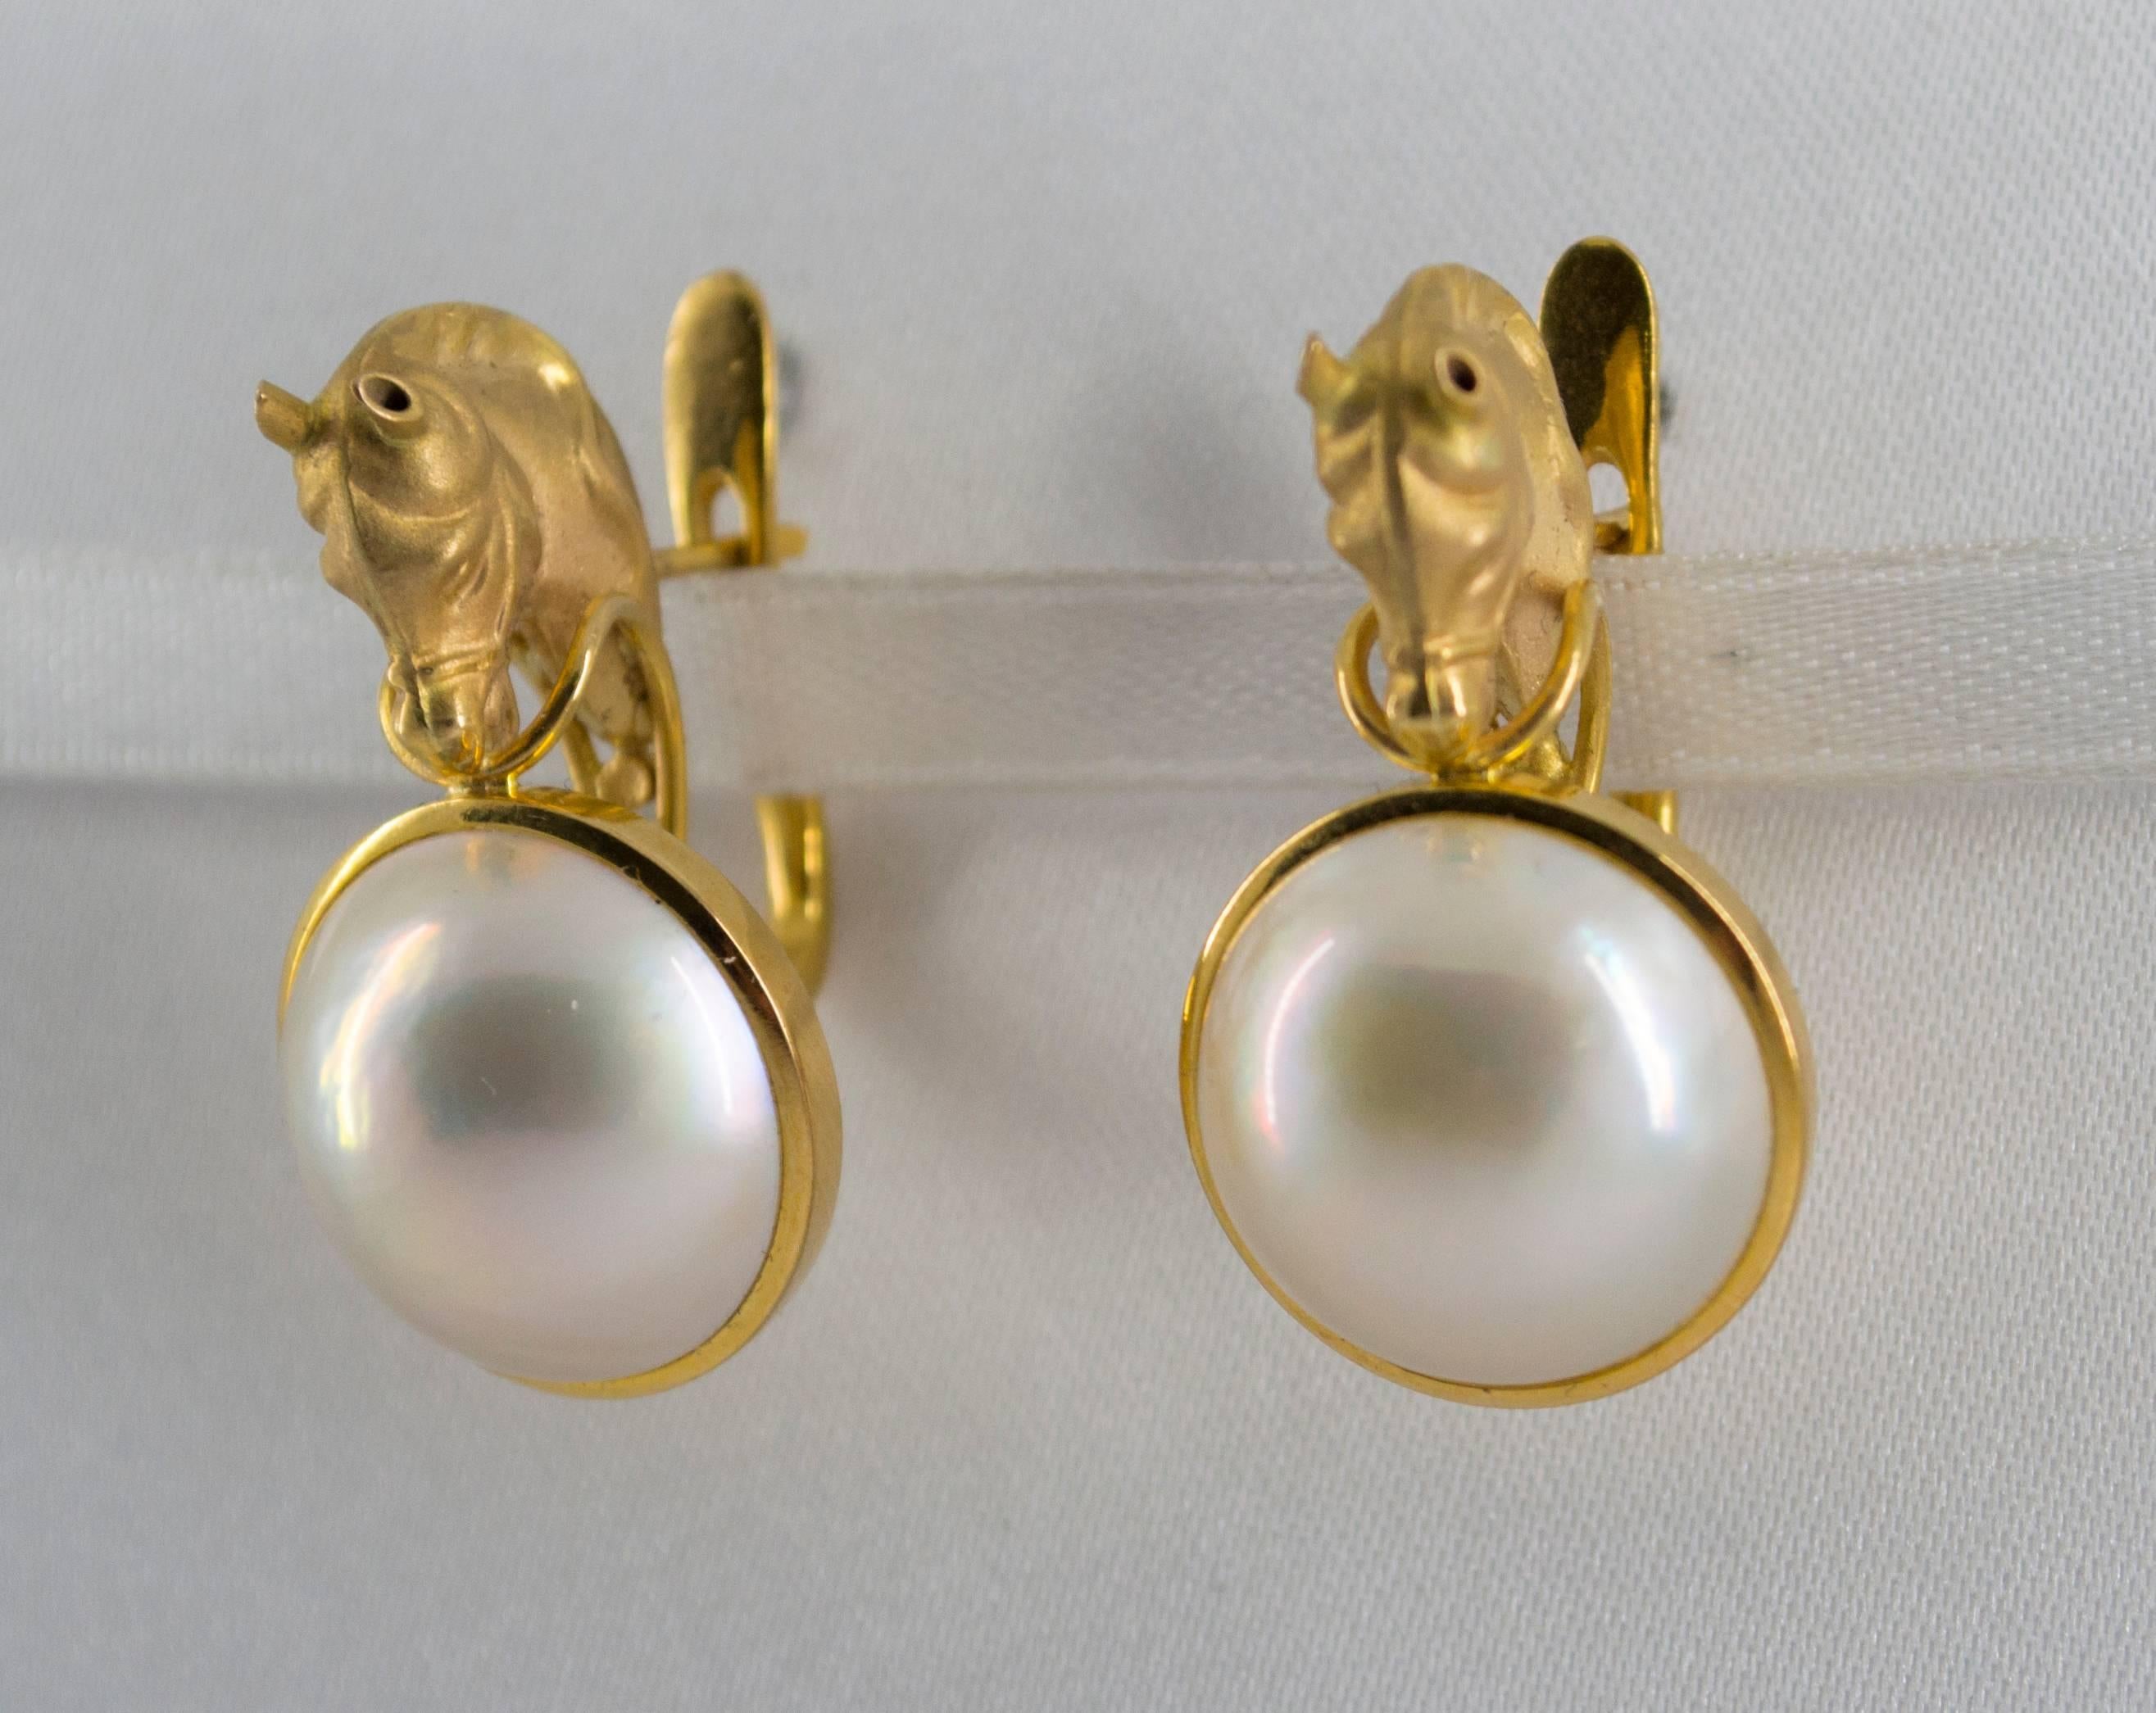 This Earrings are made of 9K Yellow Gold.
This Earrings have two Mabe Pearls.
All our Earrings have pins for pierced ears but we can change the closure and make any of our Earrings suitable even for non-pierced ears.
We're a workshop so every piece